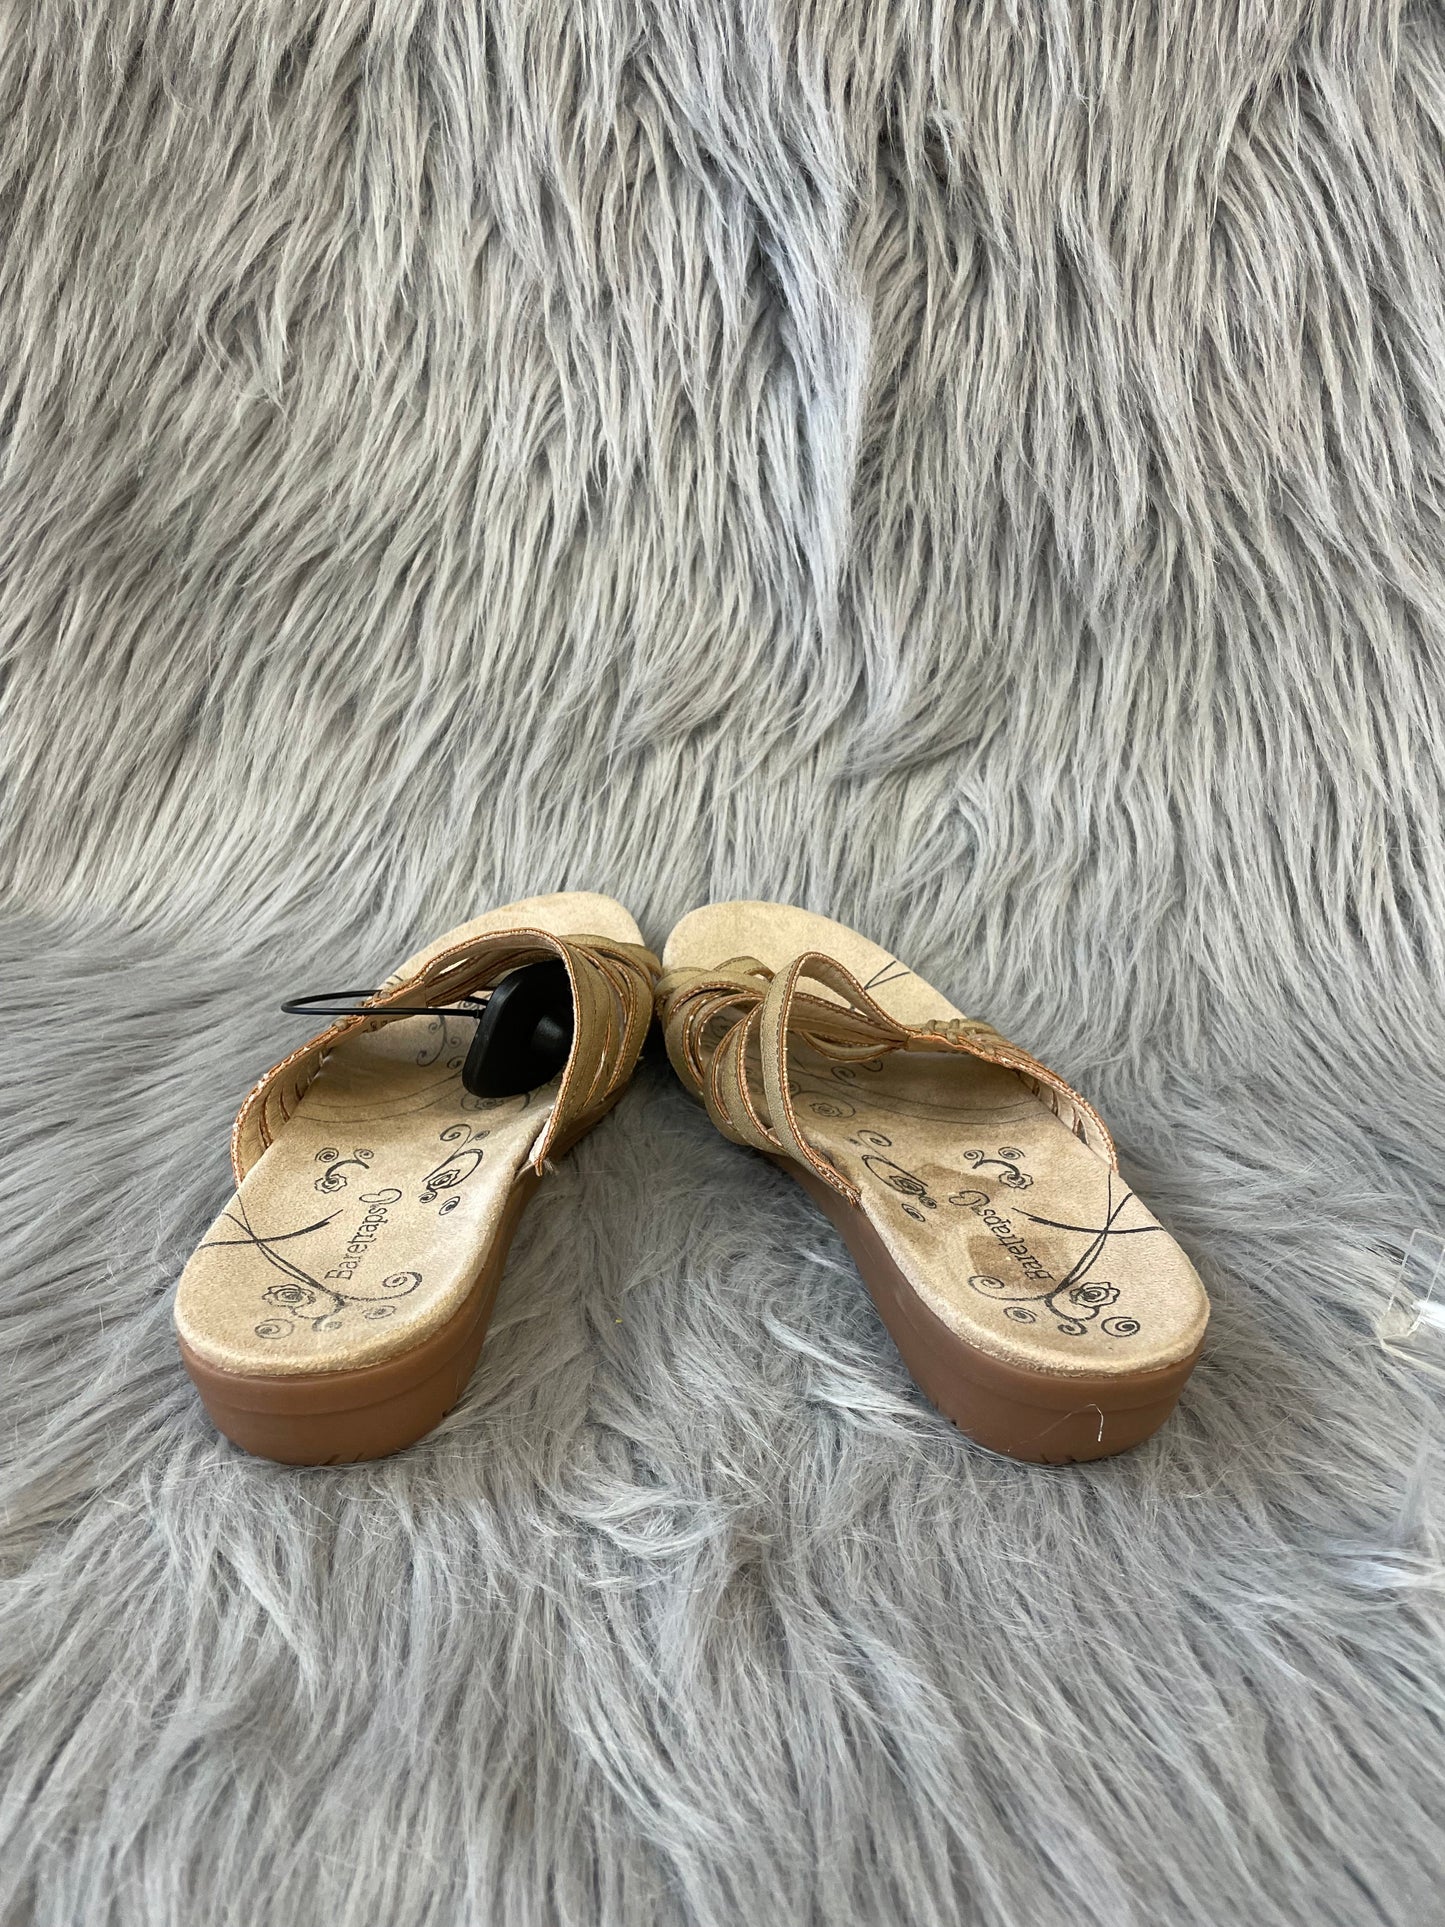 Sandals Heels Wedge By Bare Traps  Size: 7.5